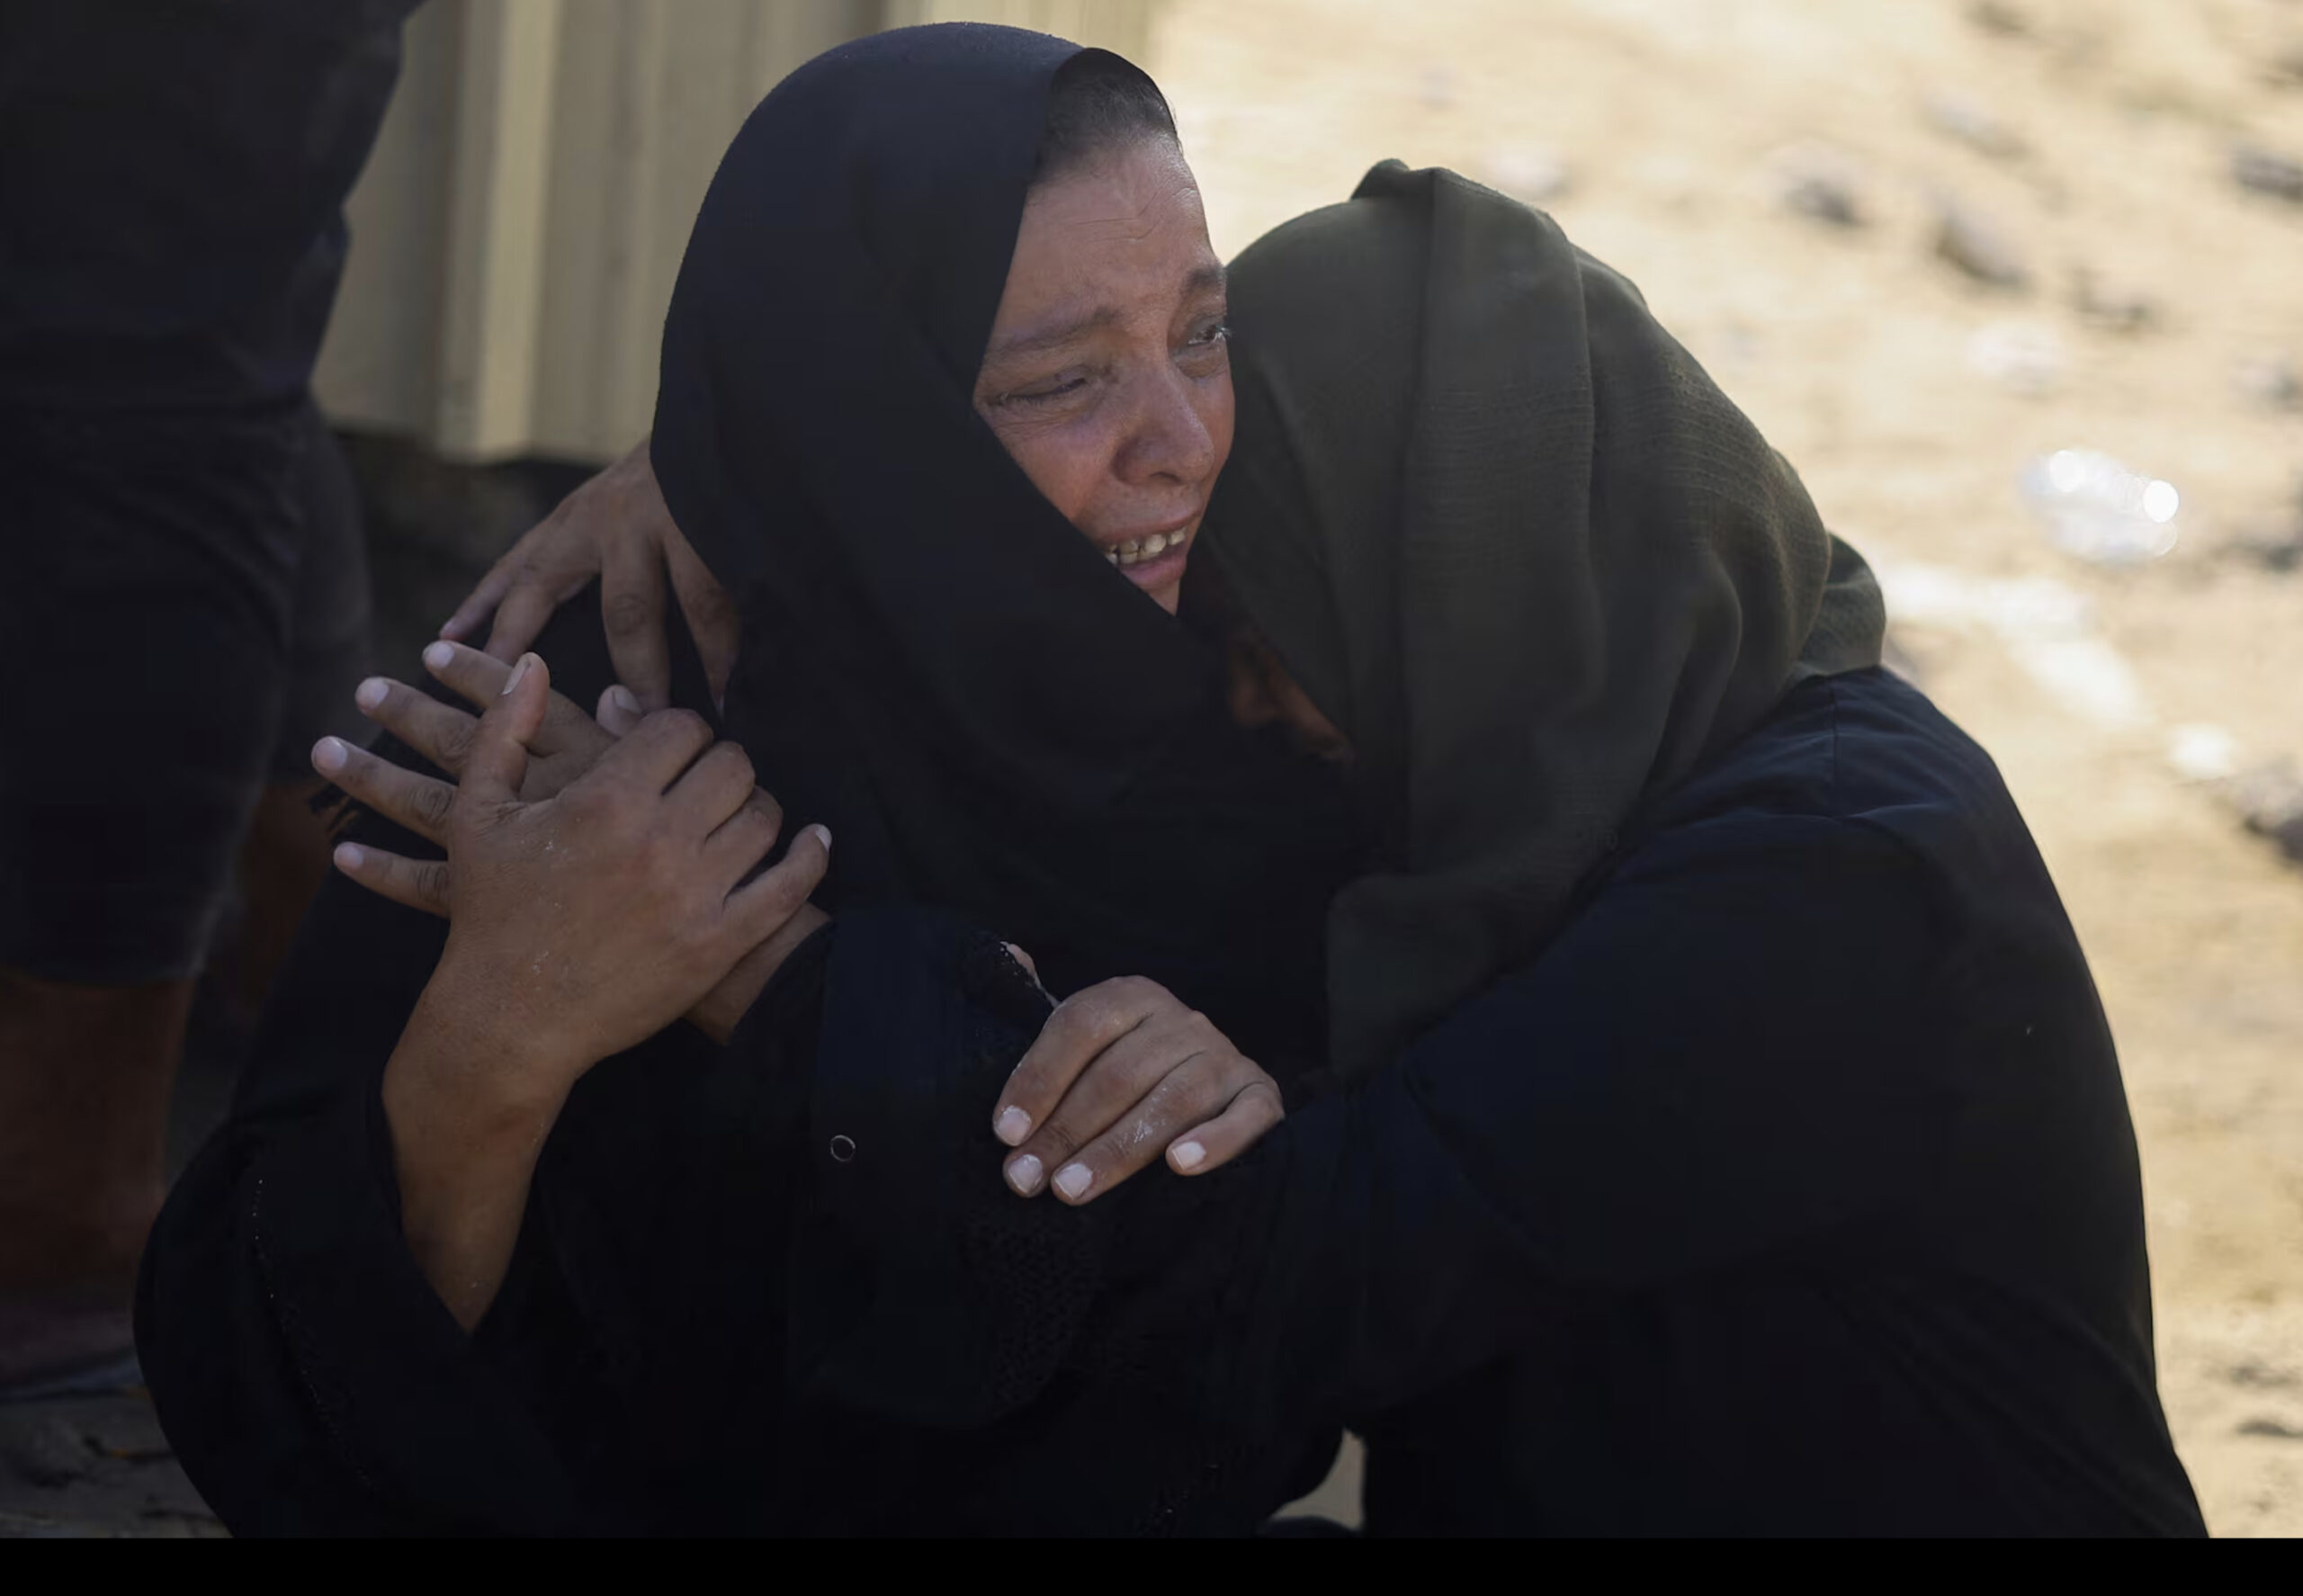 Mourners embrace during the funeral of Palestinians killed in the Israeli strikes, amid Israeli war on Gaza, at Nasser hospital, in Khan Younis, southern Gaza Strip July 24. Reuters